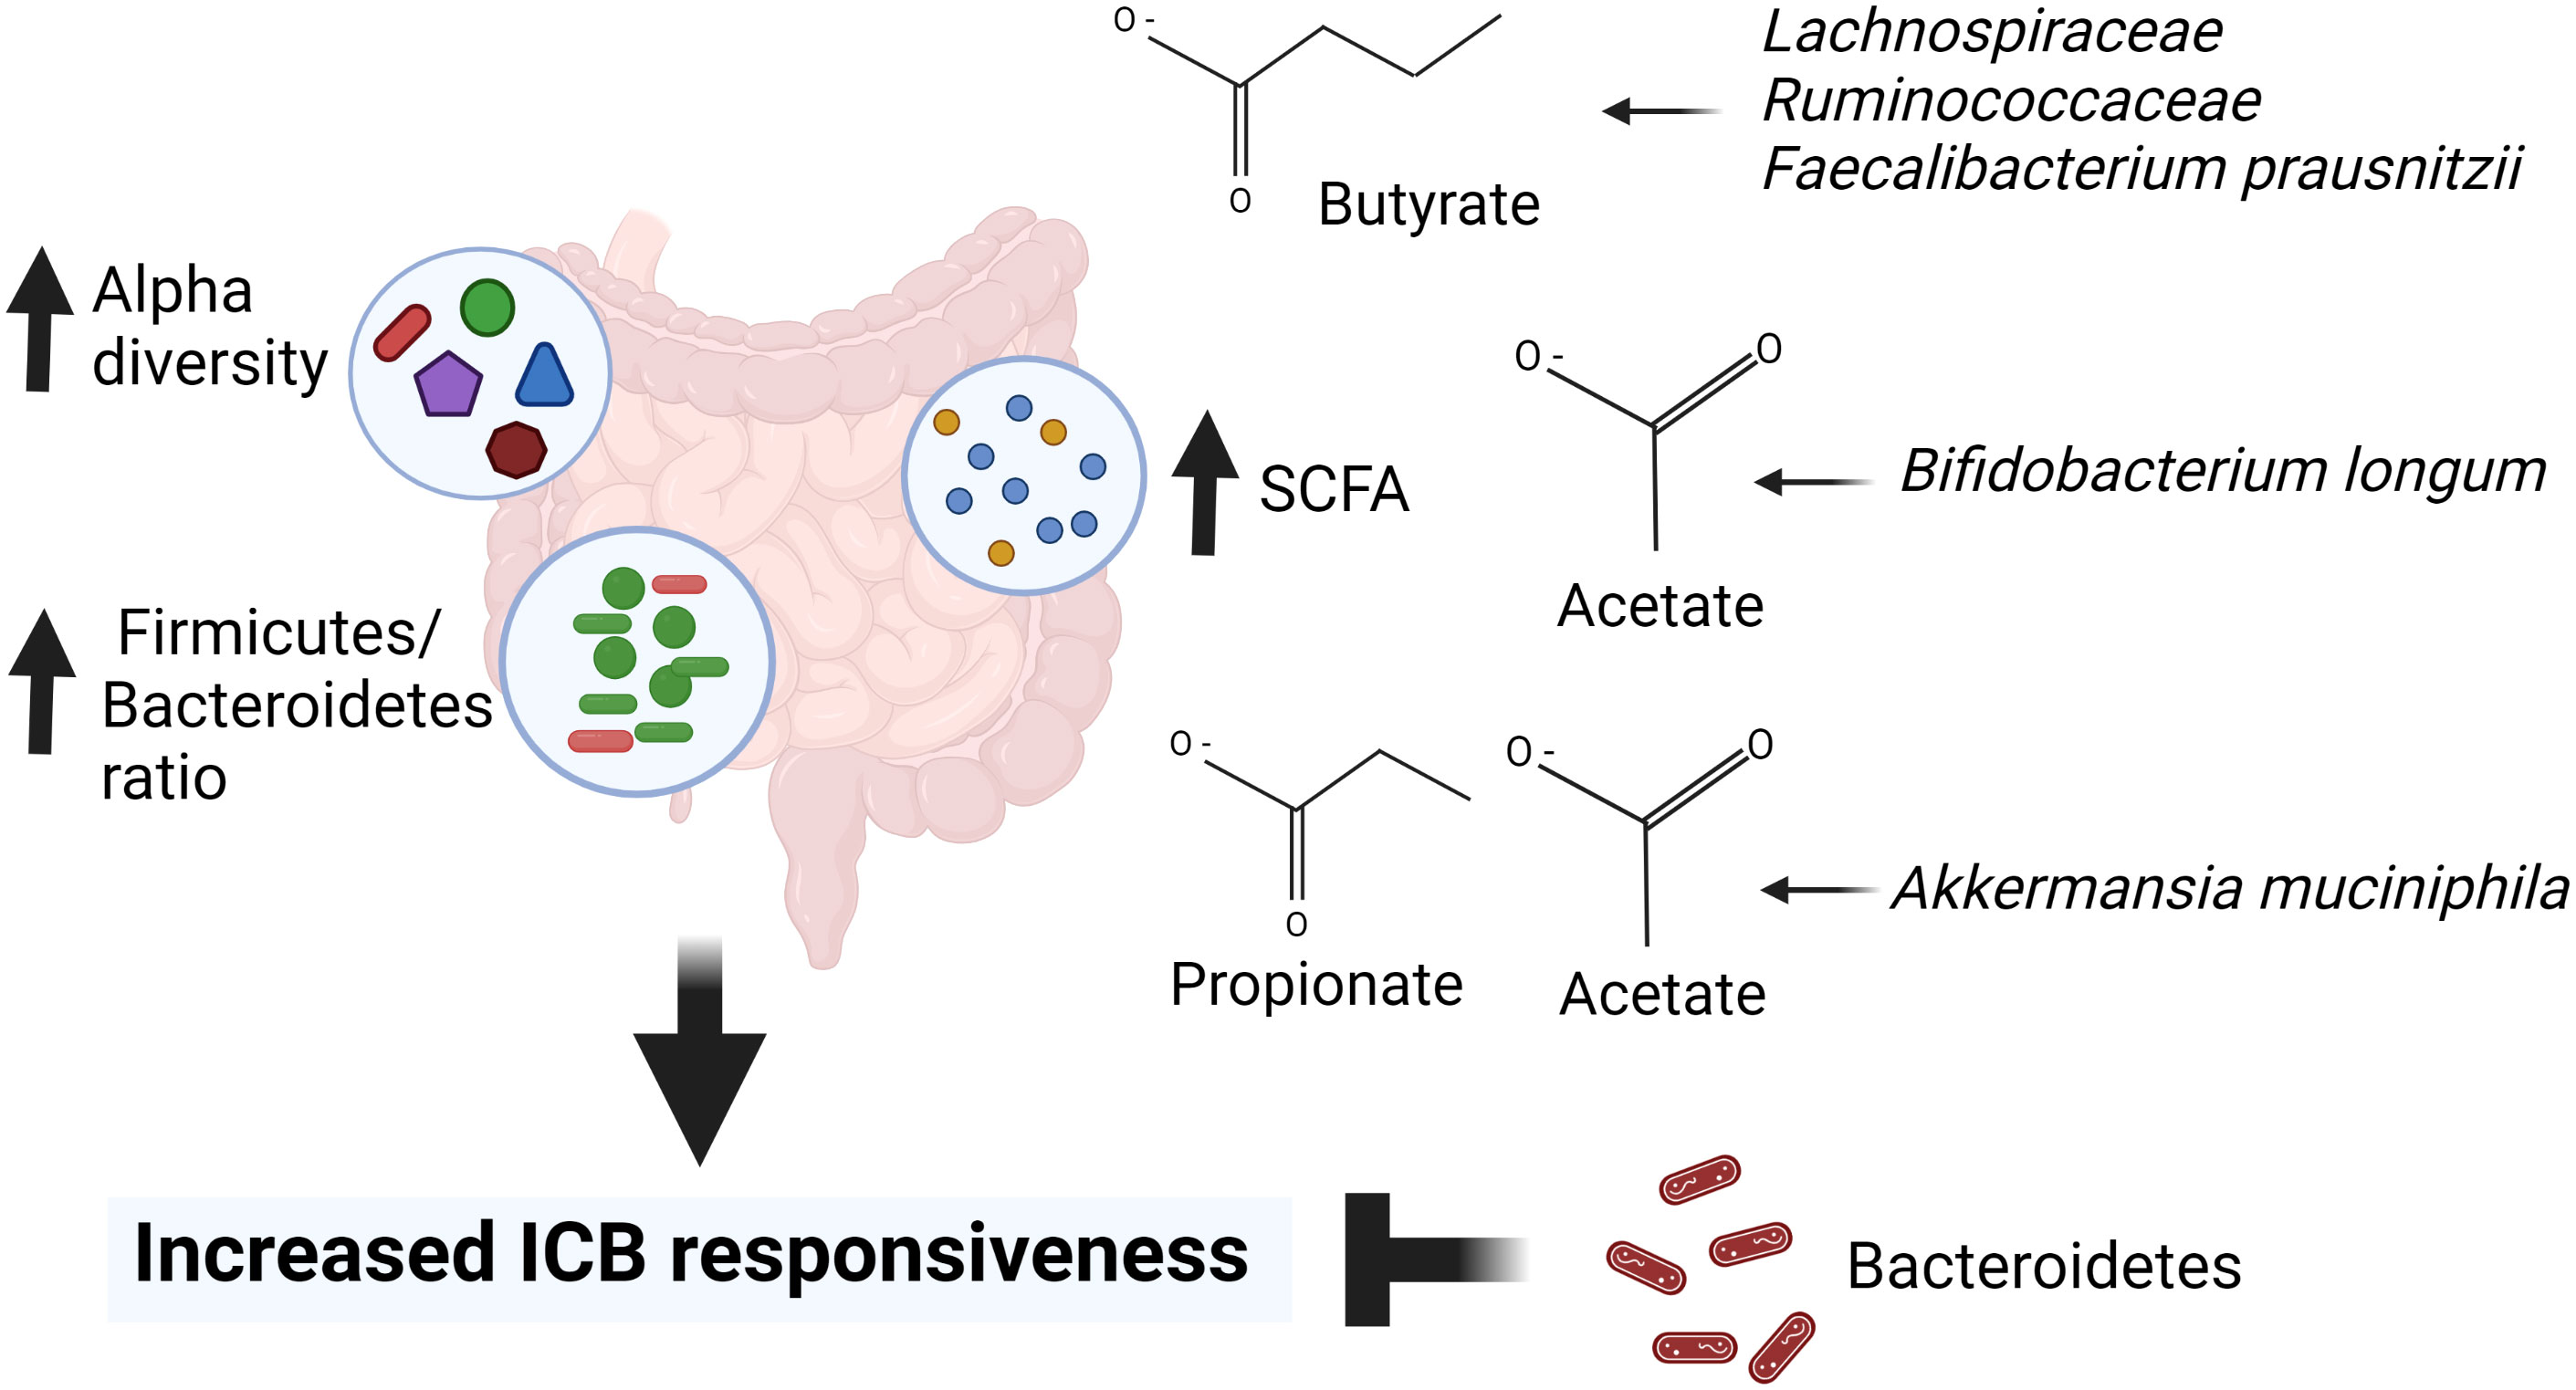 Frontiers Foods may modify responsiveness to cancer immune checkpoint blockers by altering both the gut microbiota and activation of estrogen receptors in immune cells